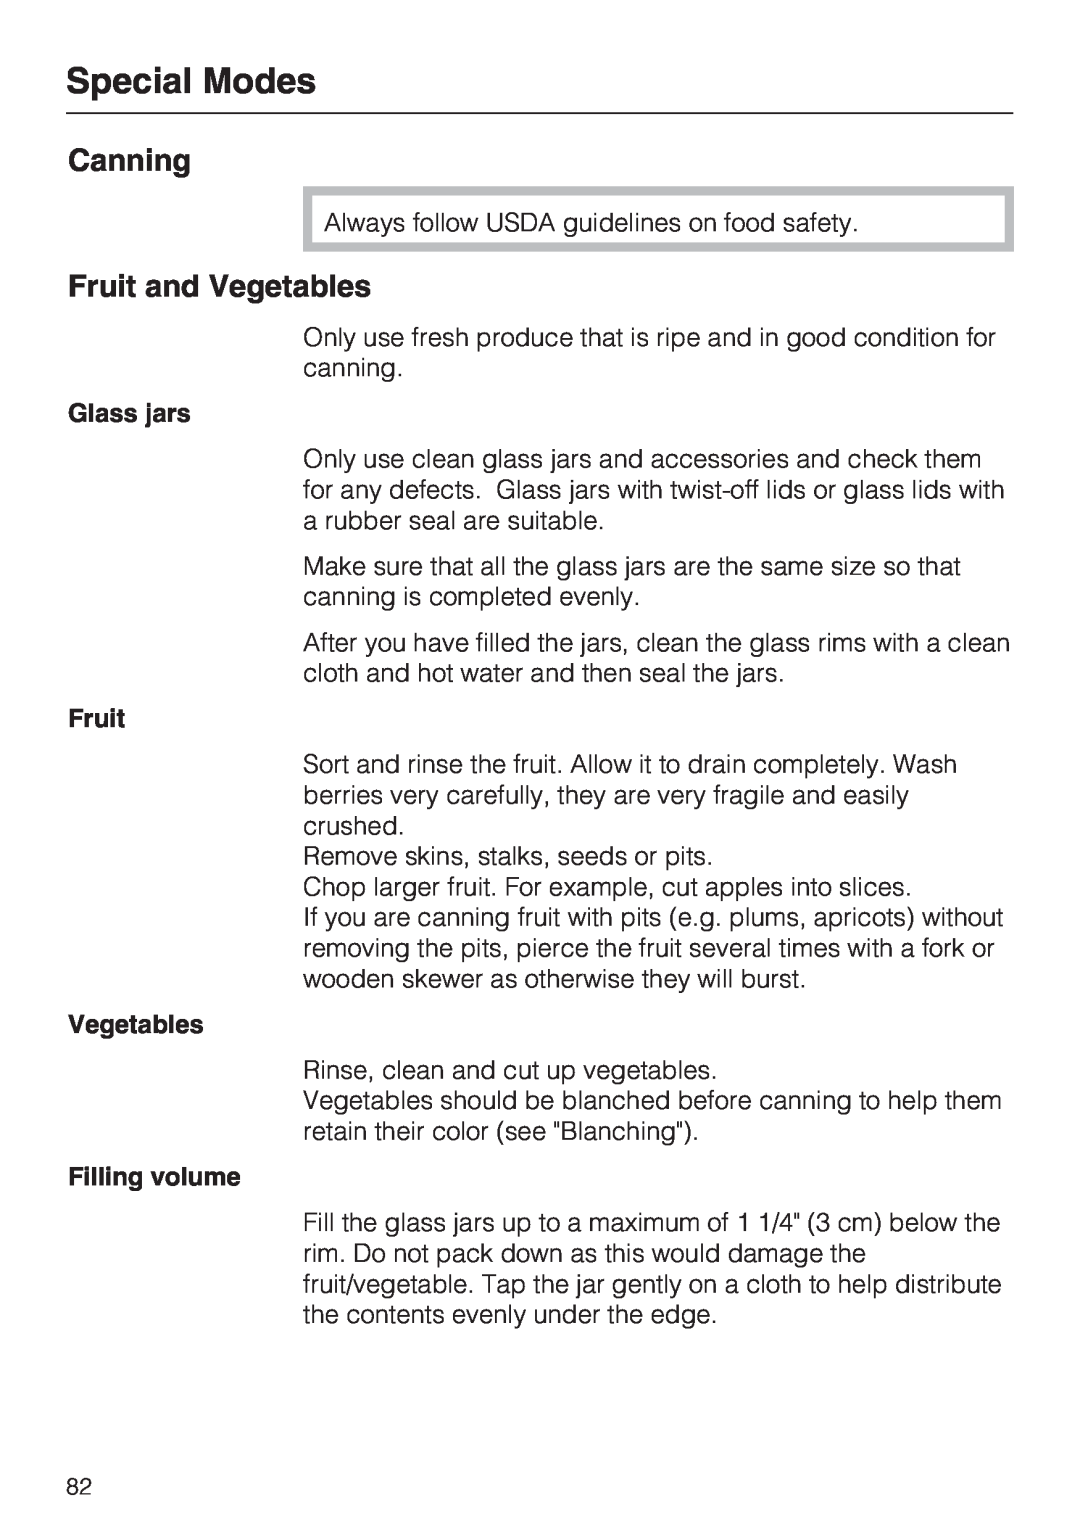 Miele 09 855 050 installation instructions Canning, Fruit and Vegetables, Special Modes, Glass jars, Filling volume 